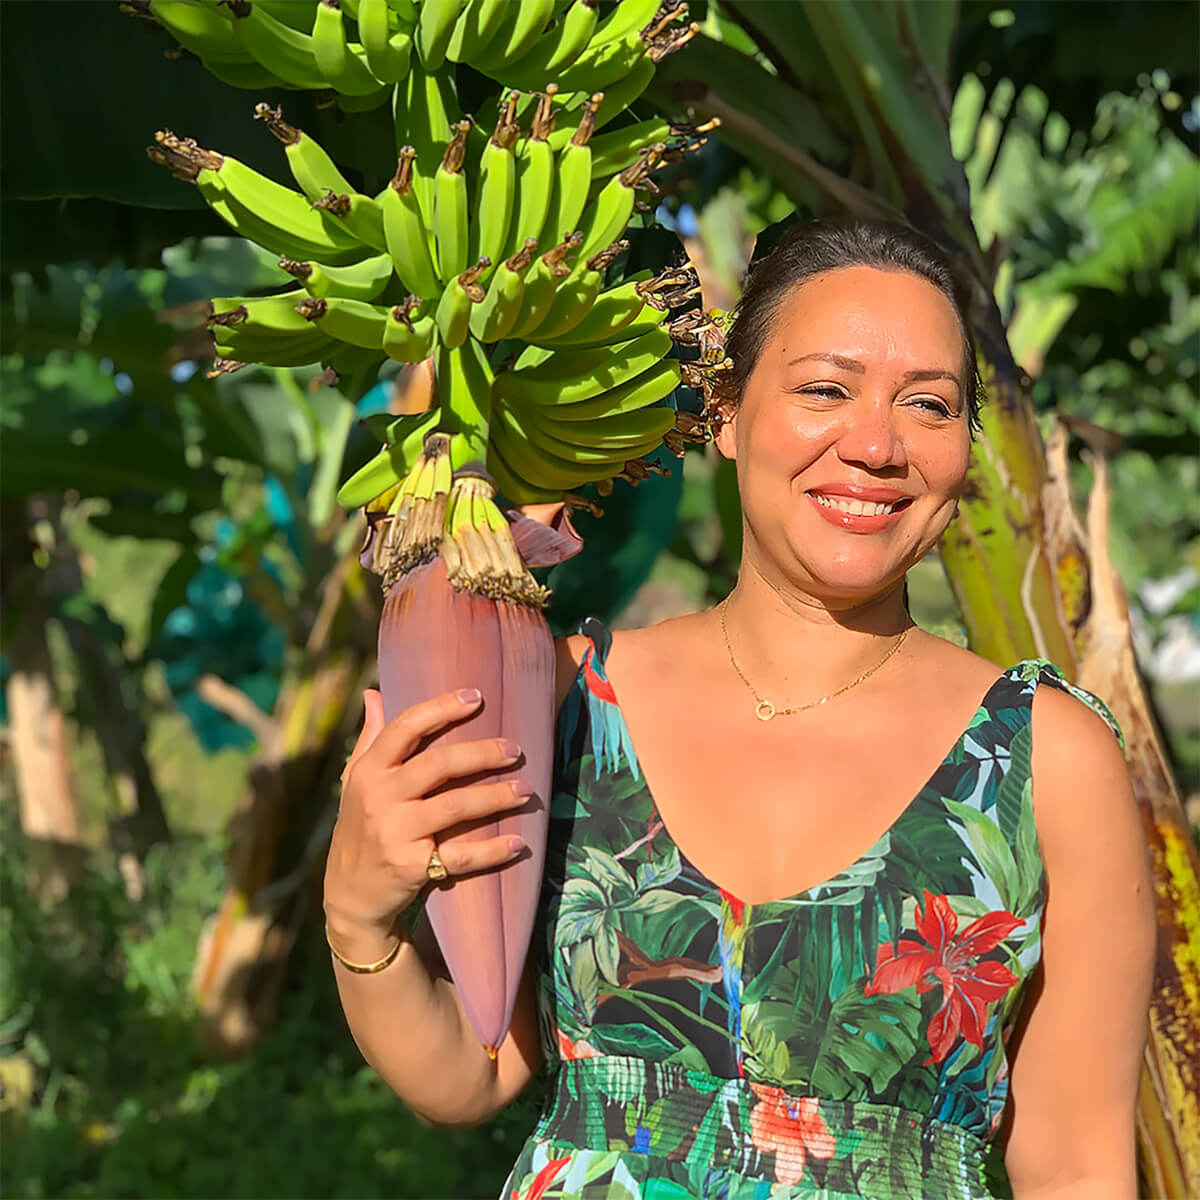 Kadalys Founder Shirley Billot standing next to pink banana plant. Blurred images of additional banana trees are in the background.